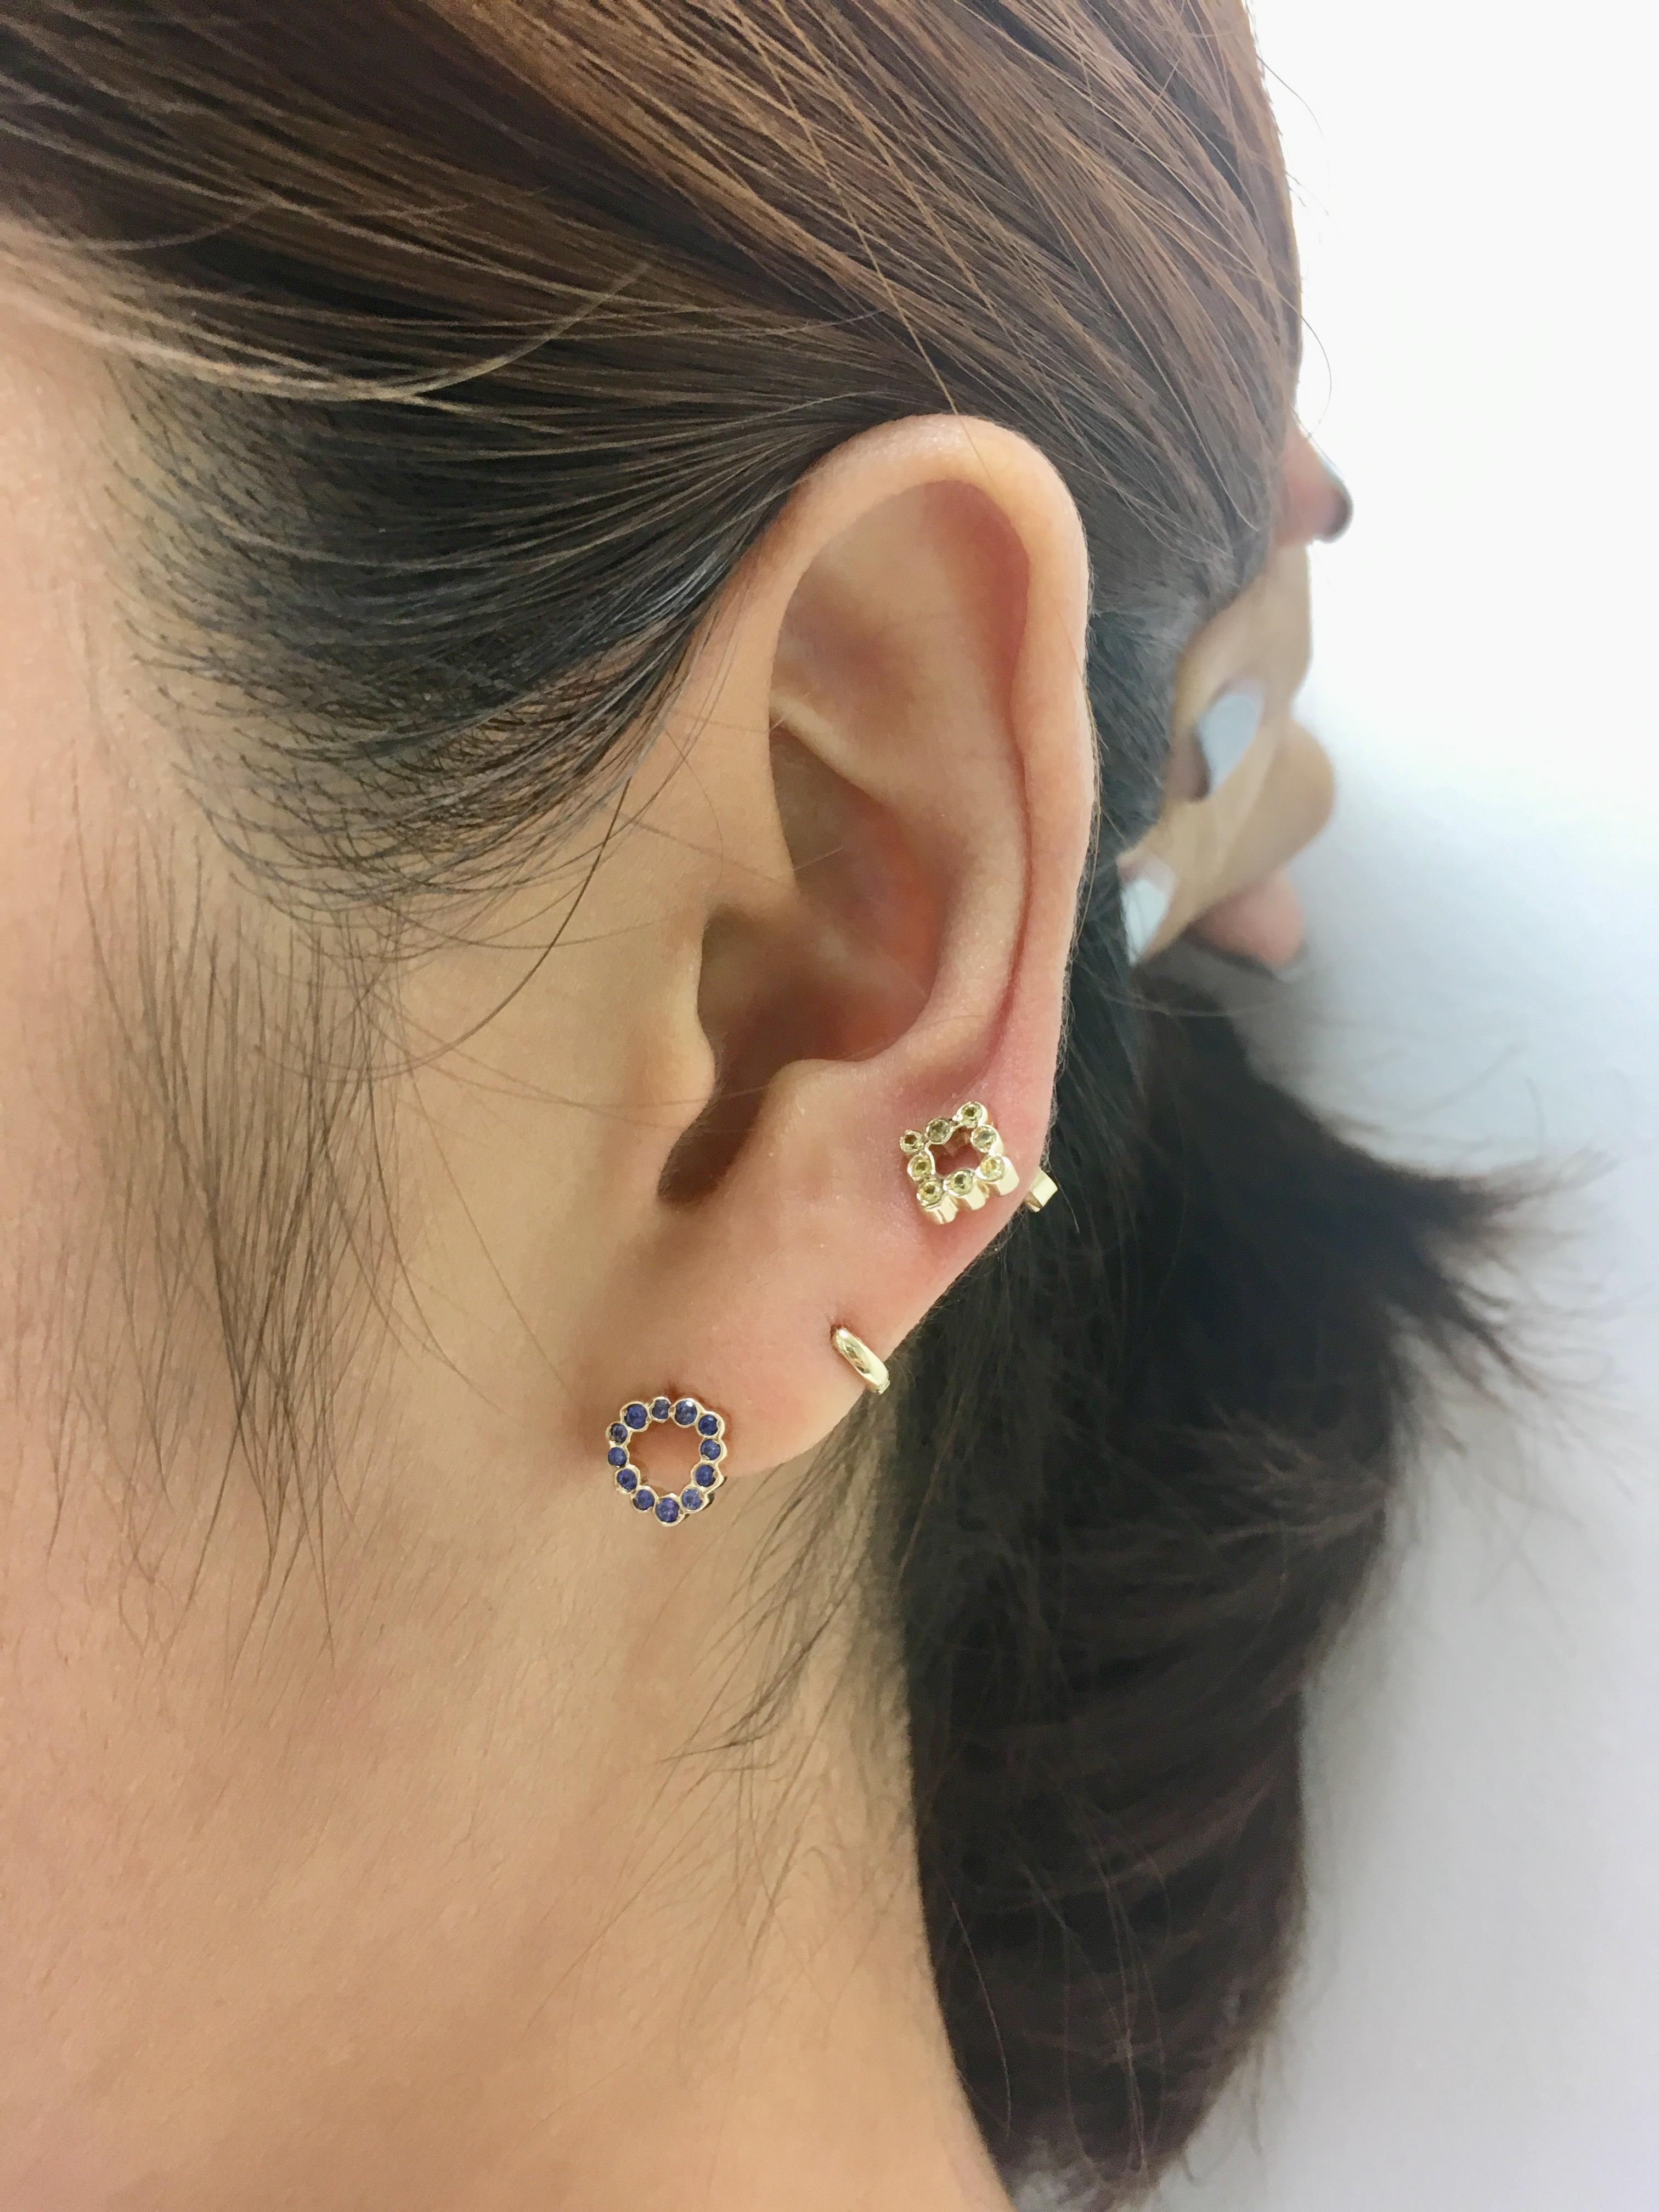 Wear these miniature triangle shaped stud earings with Blue Sapphires for a punch of
color on your ears. Mix and match with your favorite single earrings for a fun mismatched look.

Sold as a Single Earring (not as a pair).

Inspired by seeing the